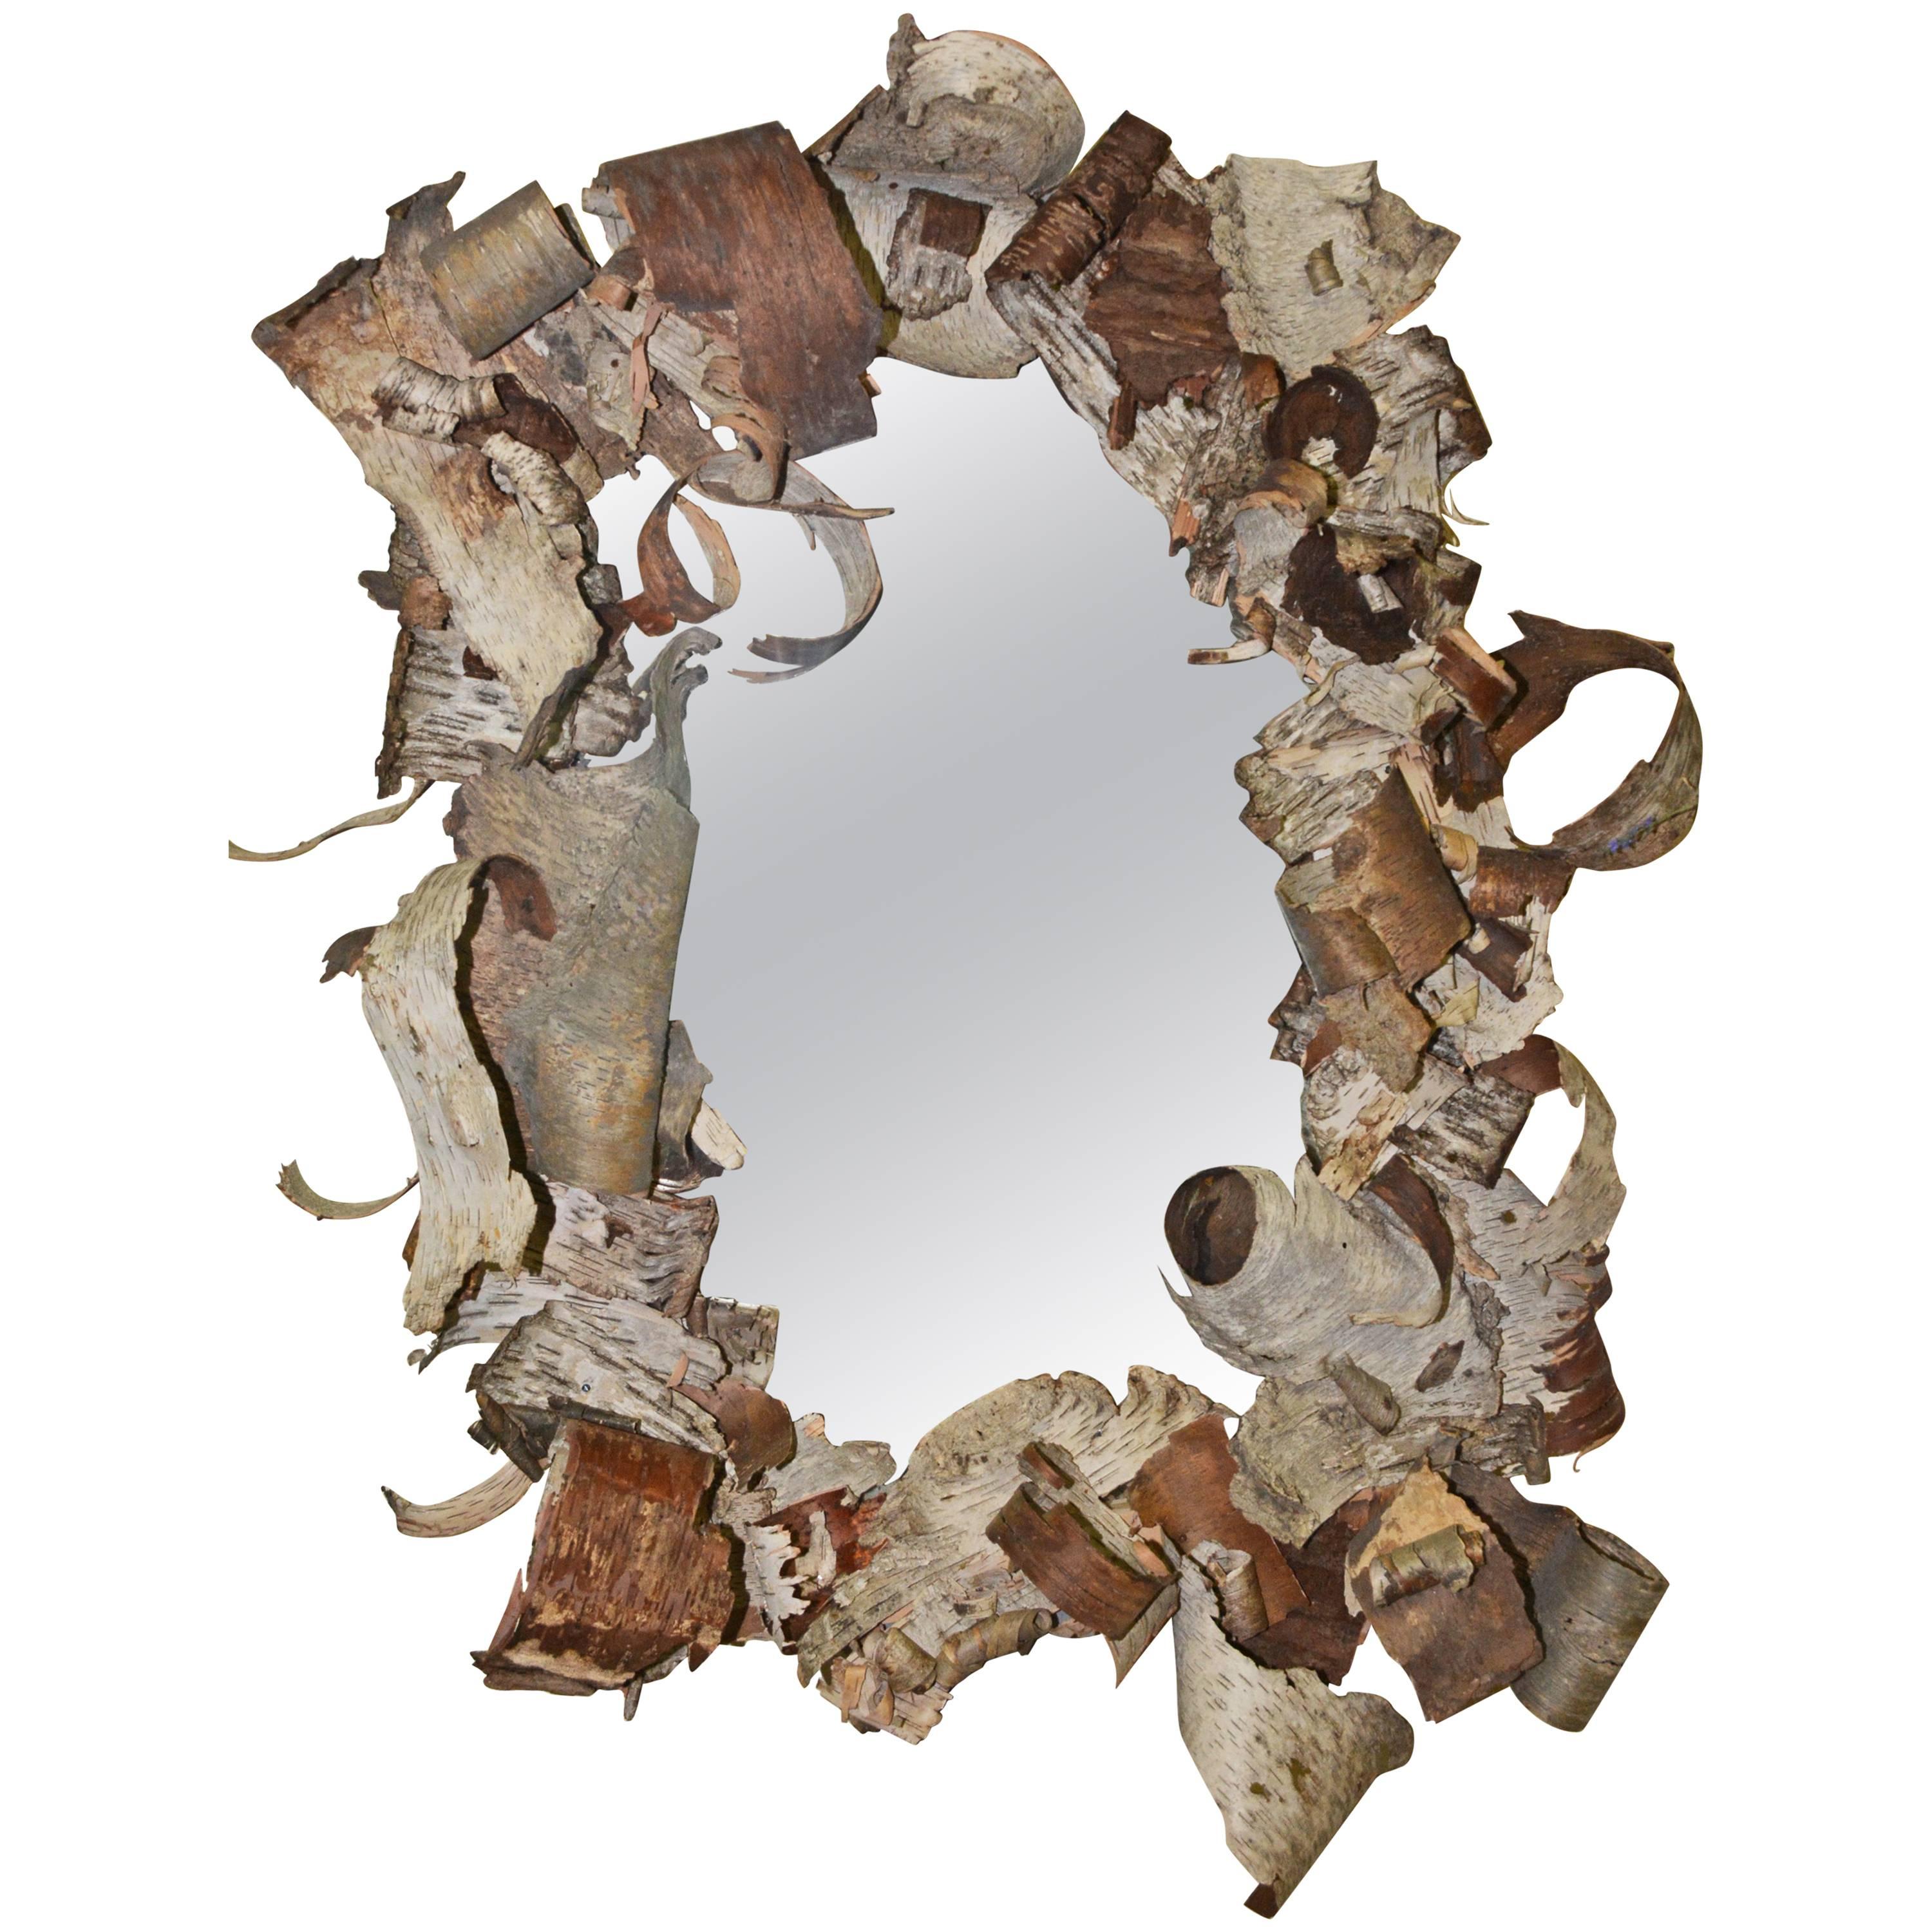 Rustic Curled Birch Bark Mirror For Sale